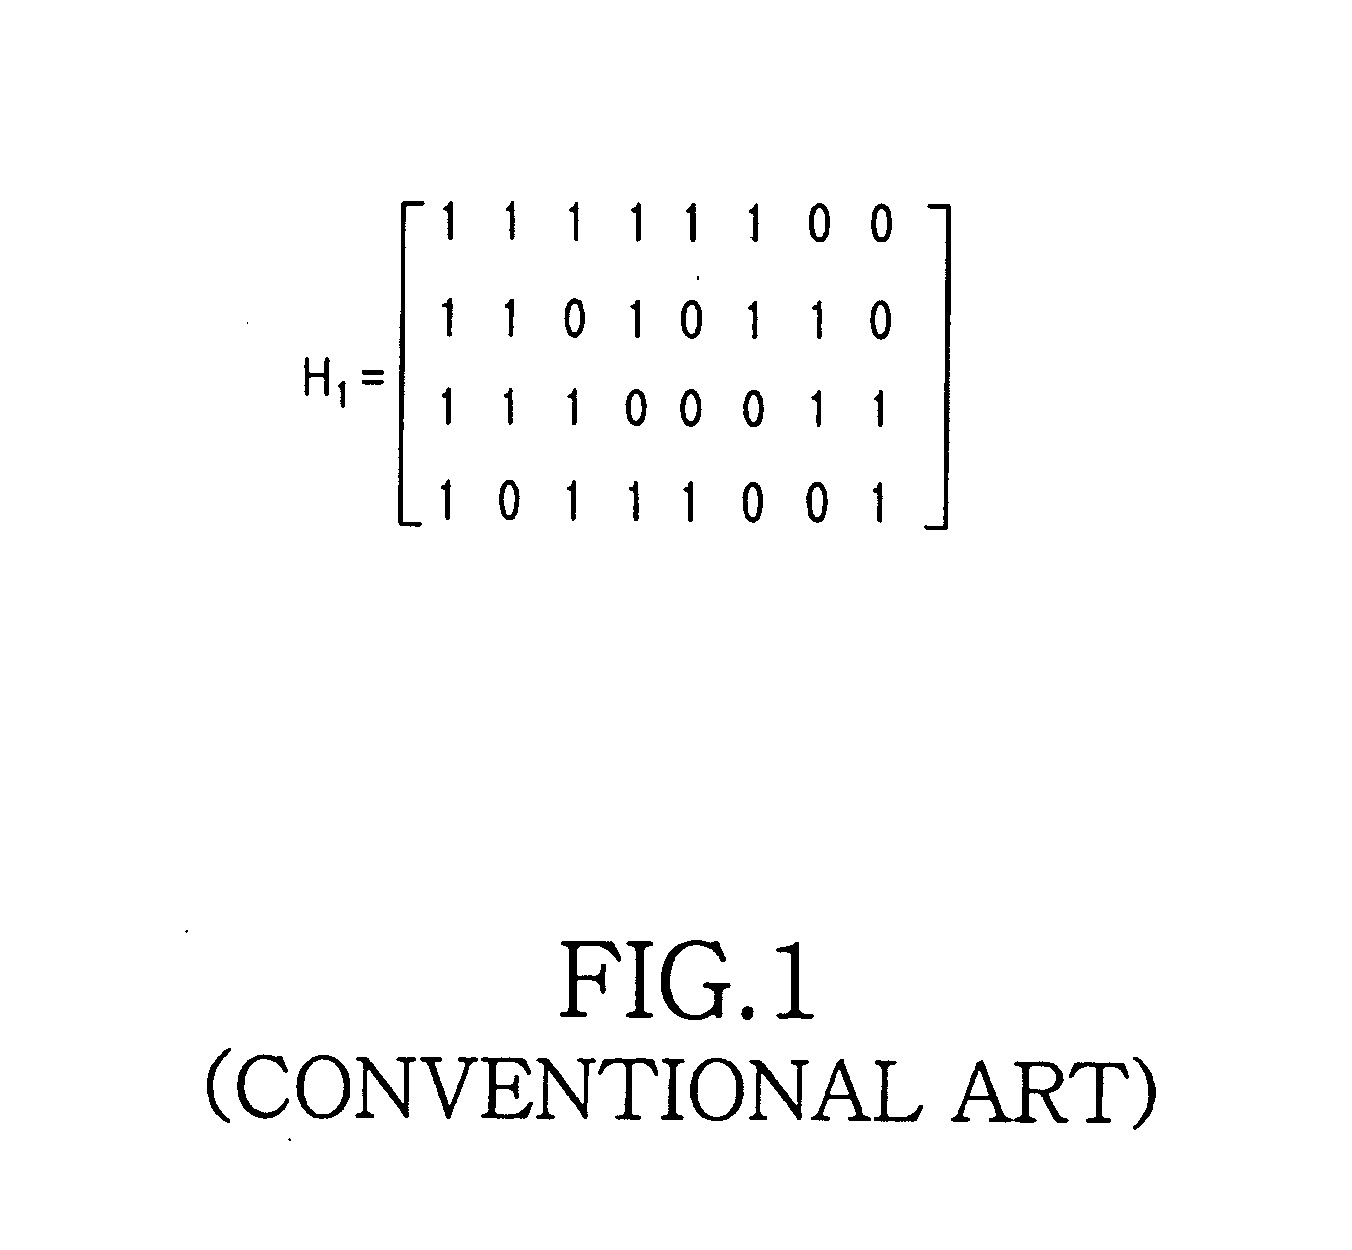 Apparatus and method for channel encoding/decoding in communication system using variable-length LDPC codes